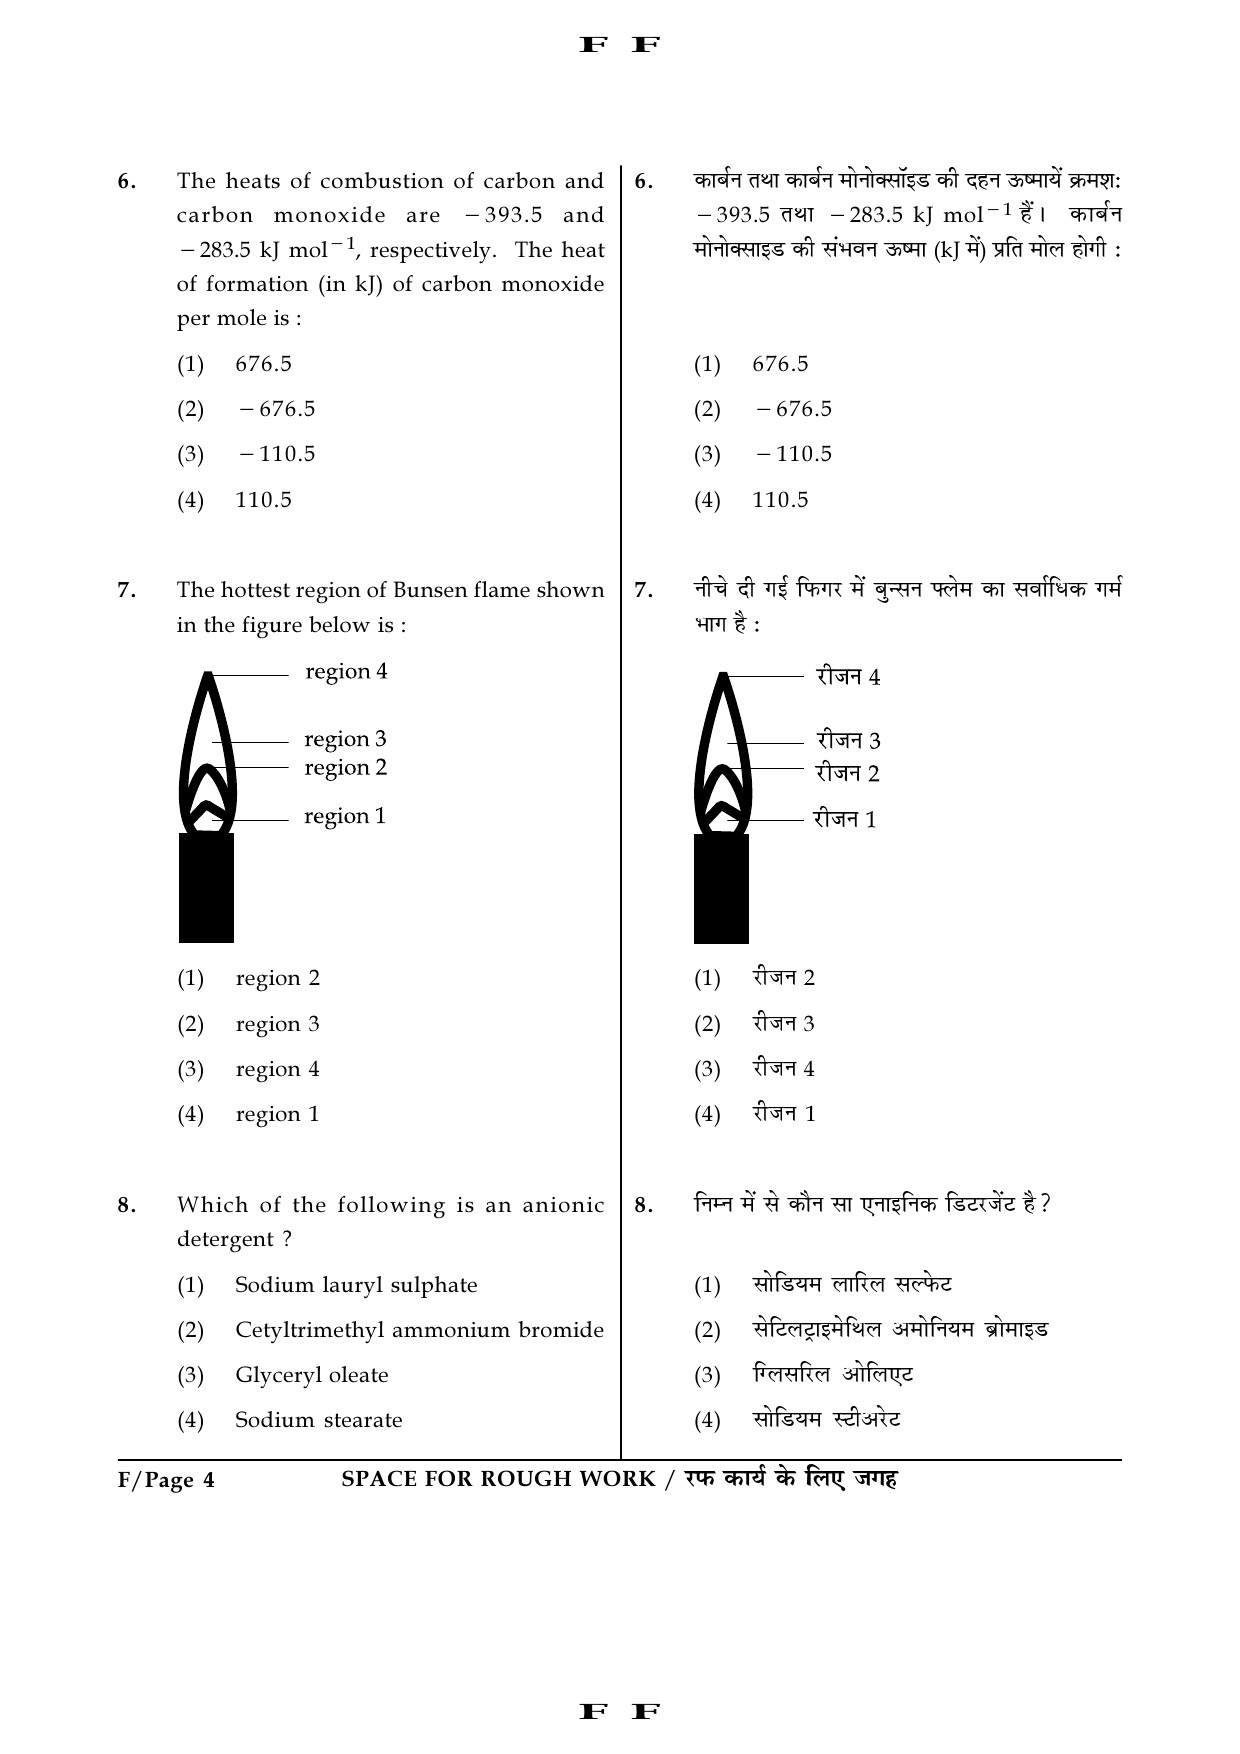 JEE Main Exam Question Paper 2016 Booklet F 4